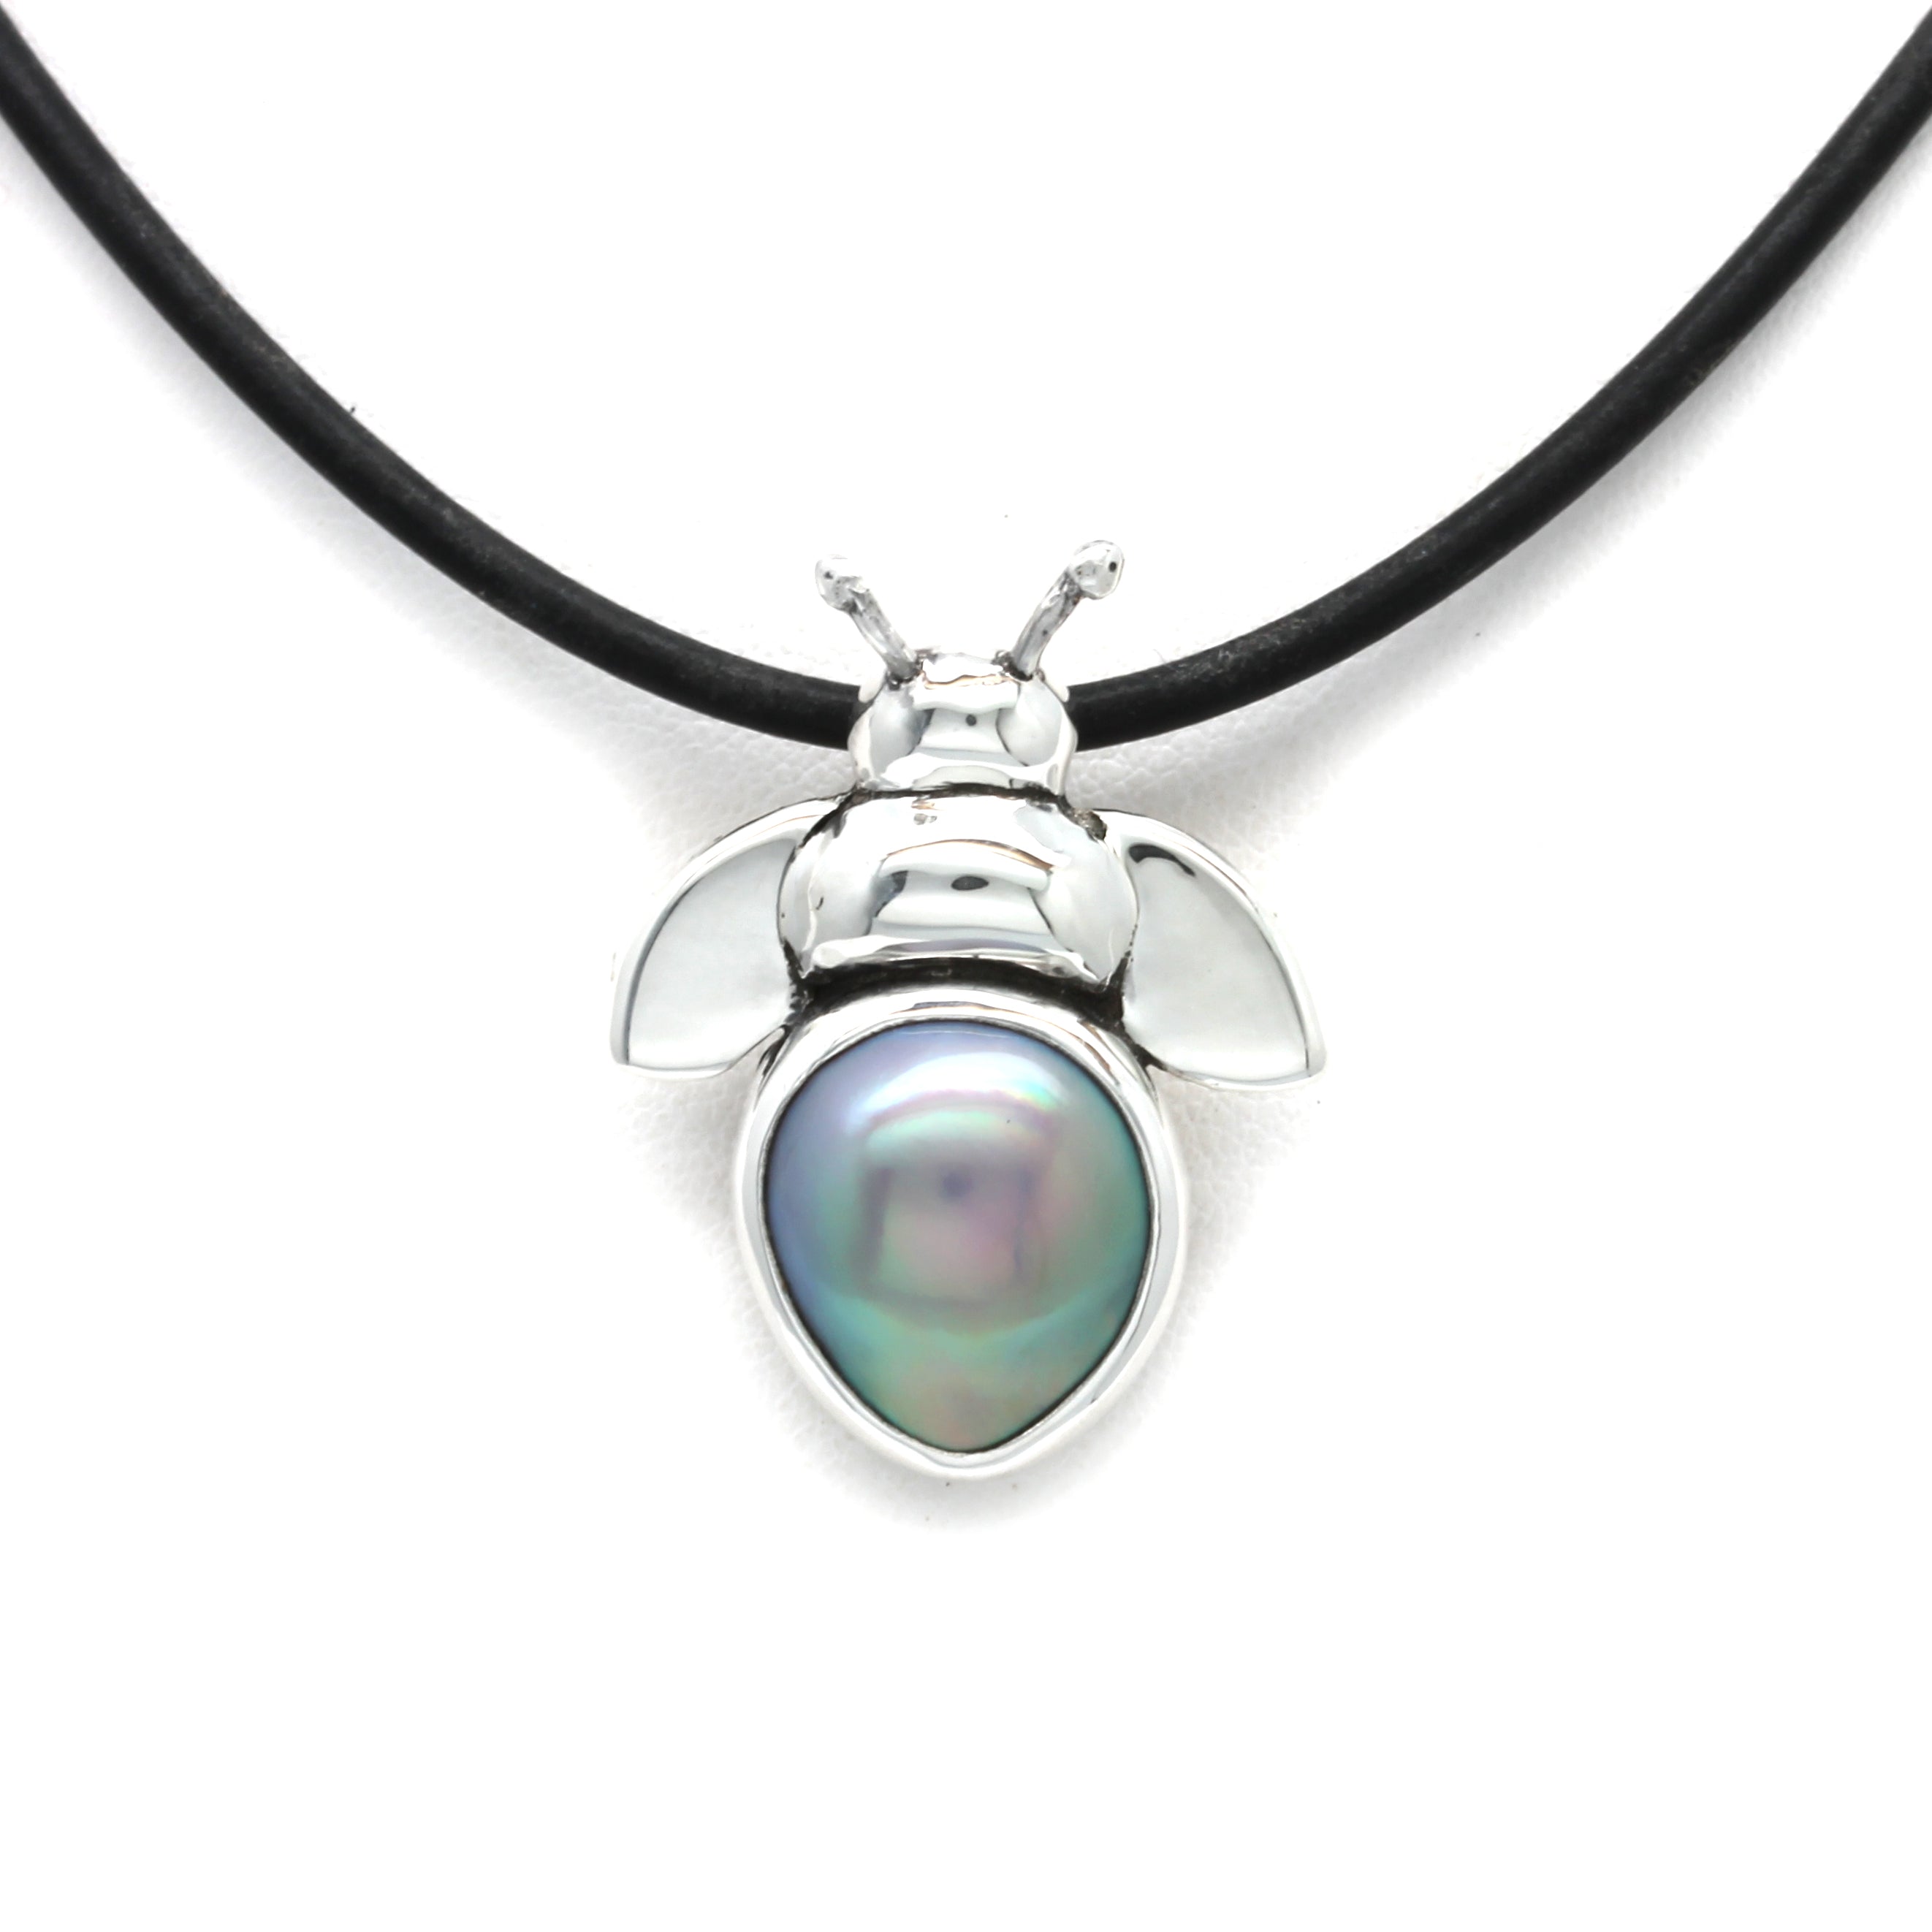 "Bee" Silver Pendant with Cortez Mabe Pearl by Priscila Canales